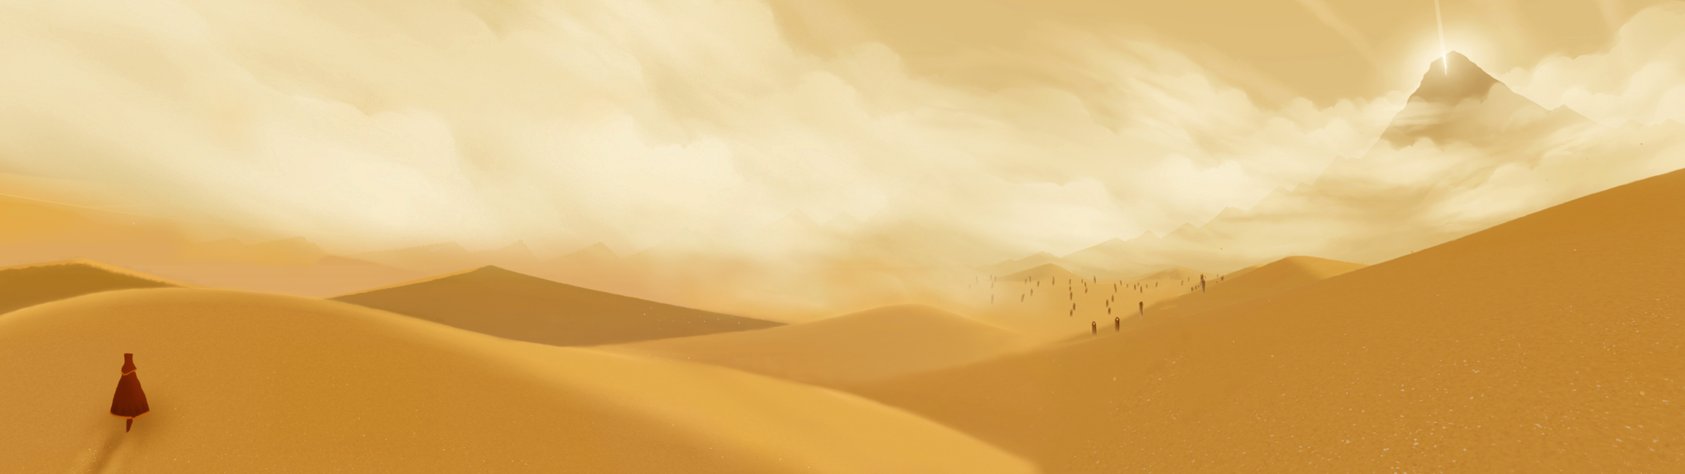 Journey Dual Screen Wallpaper By Nonexistent One On